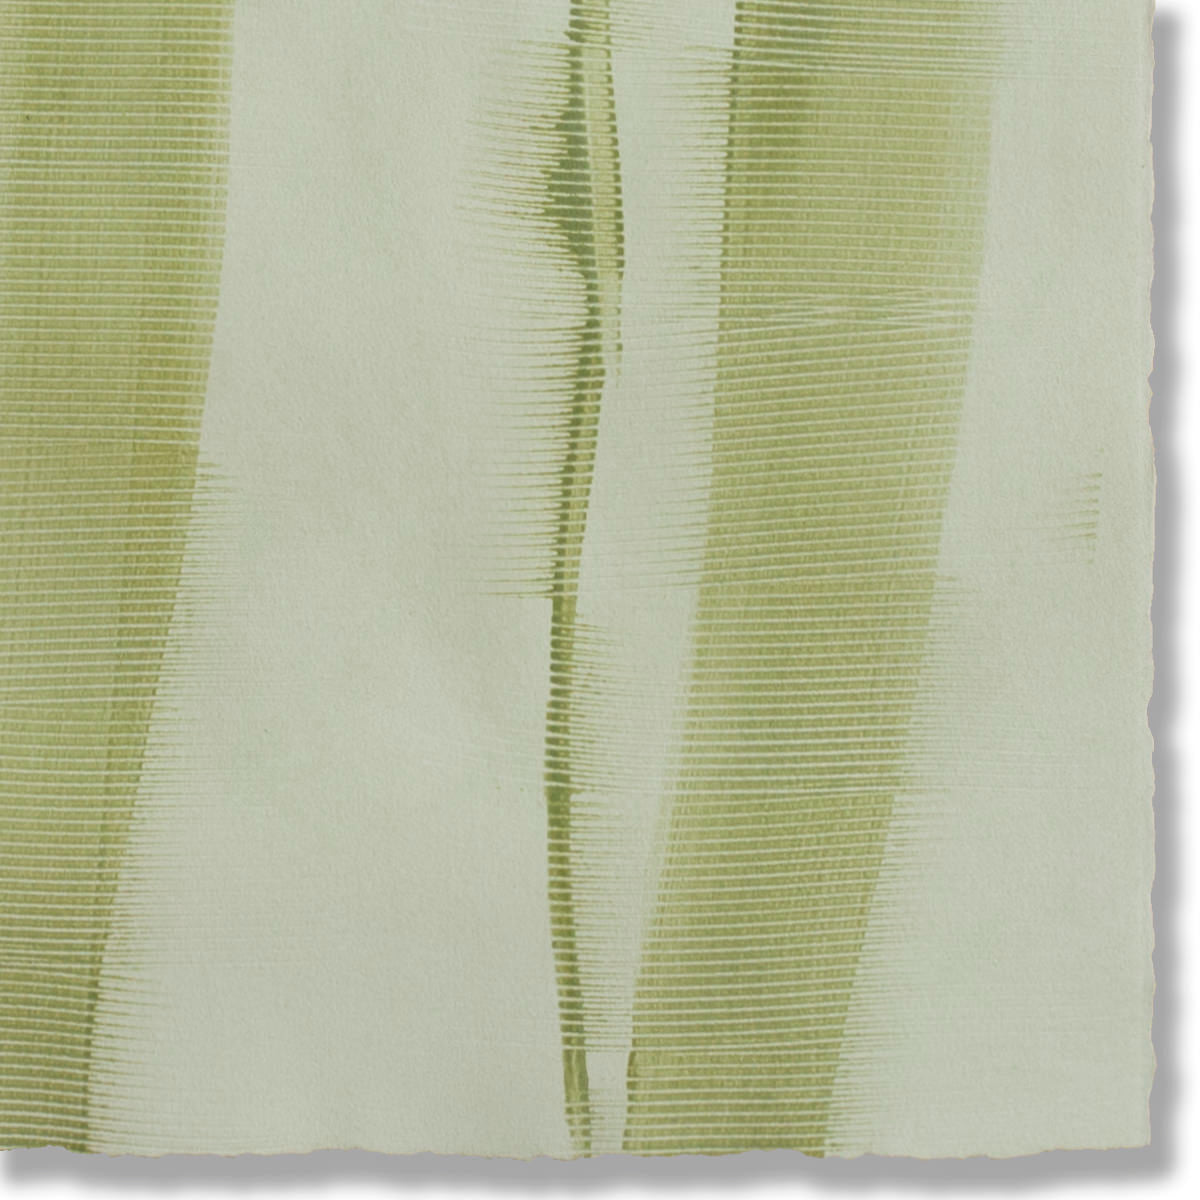 Detail of a handmade wallpaper swatch with an irregular combed stripe pattern in green on a light sage field.